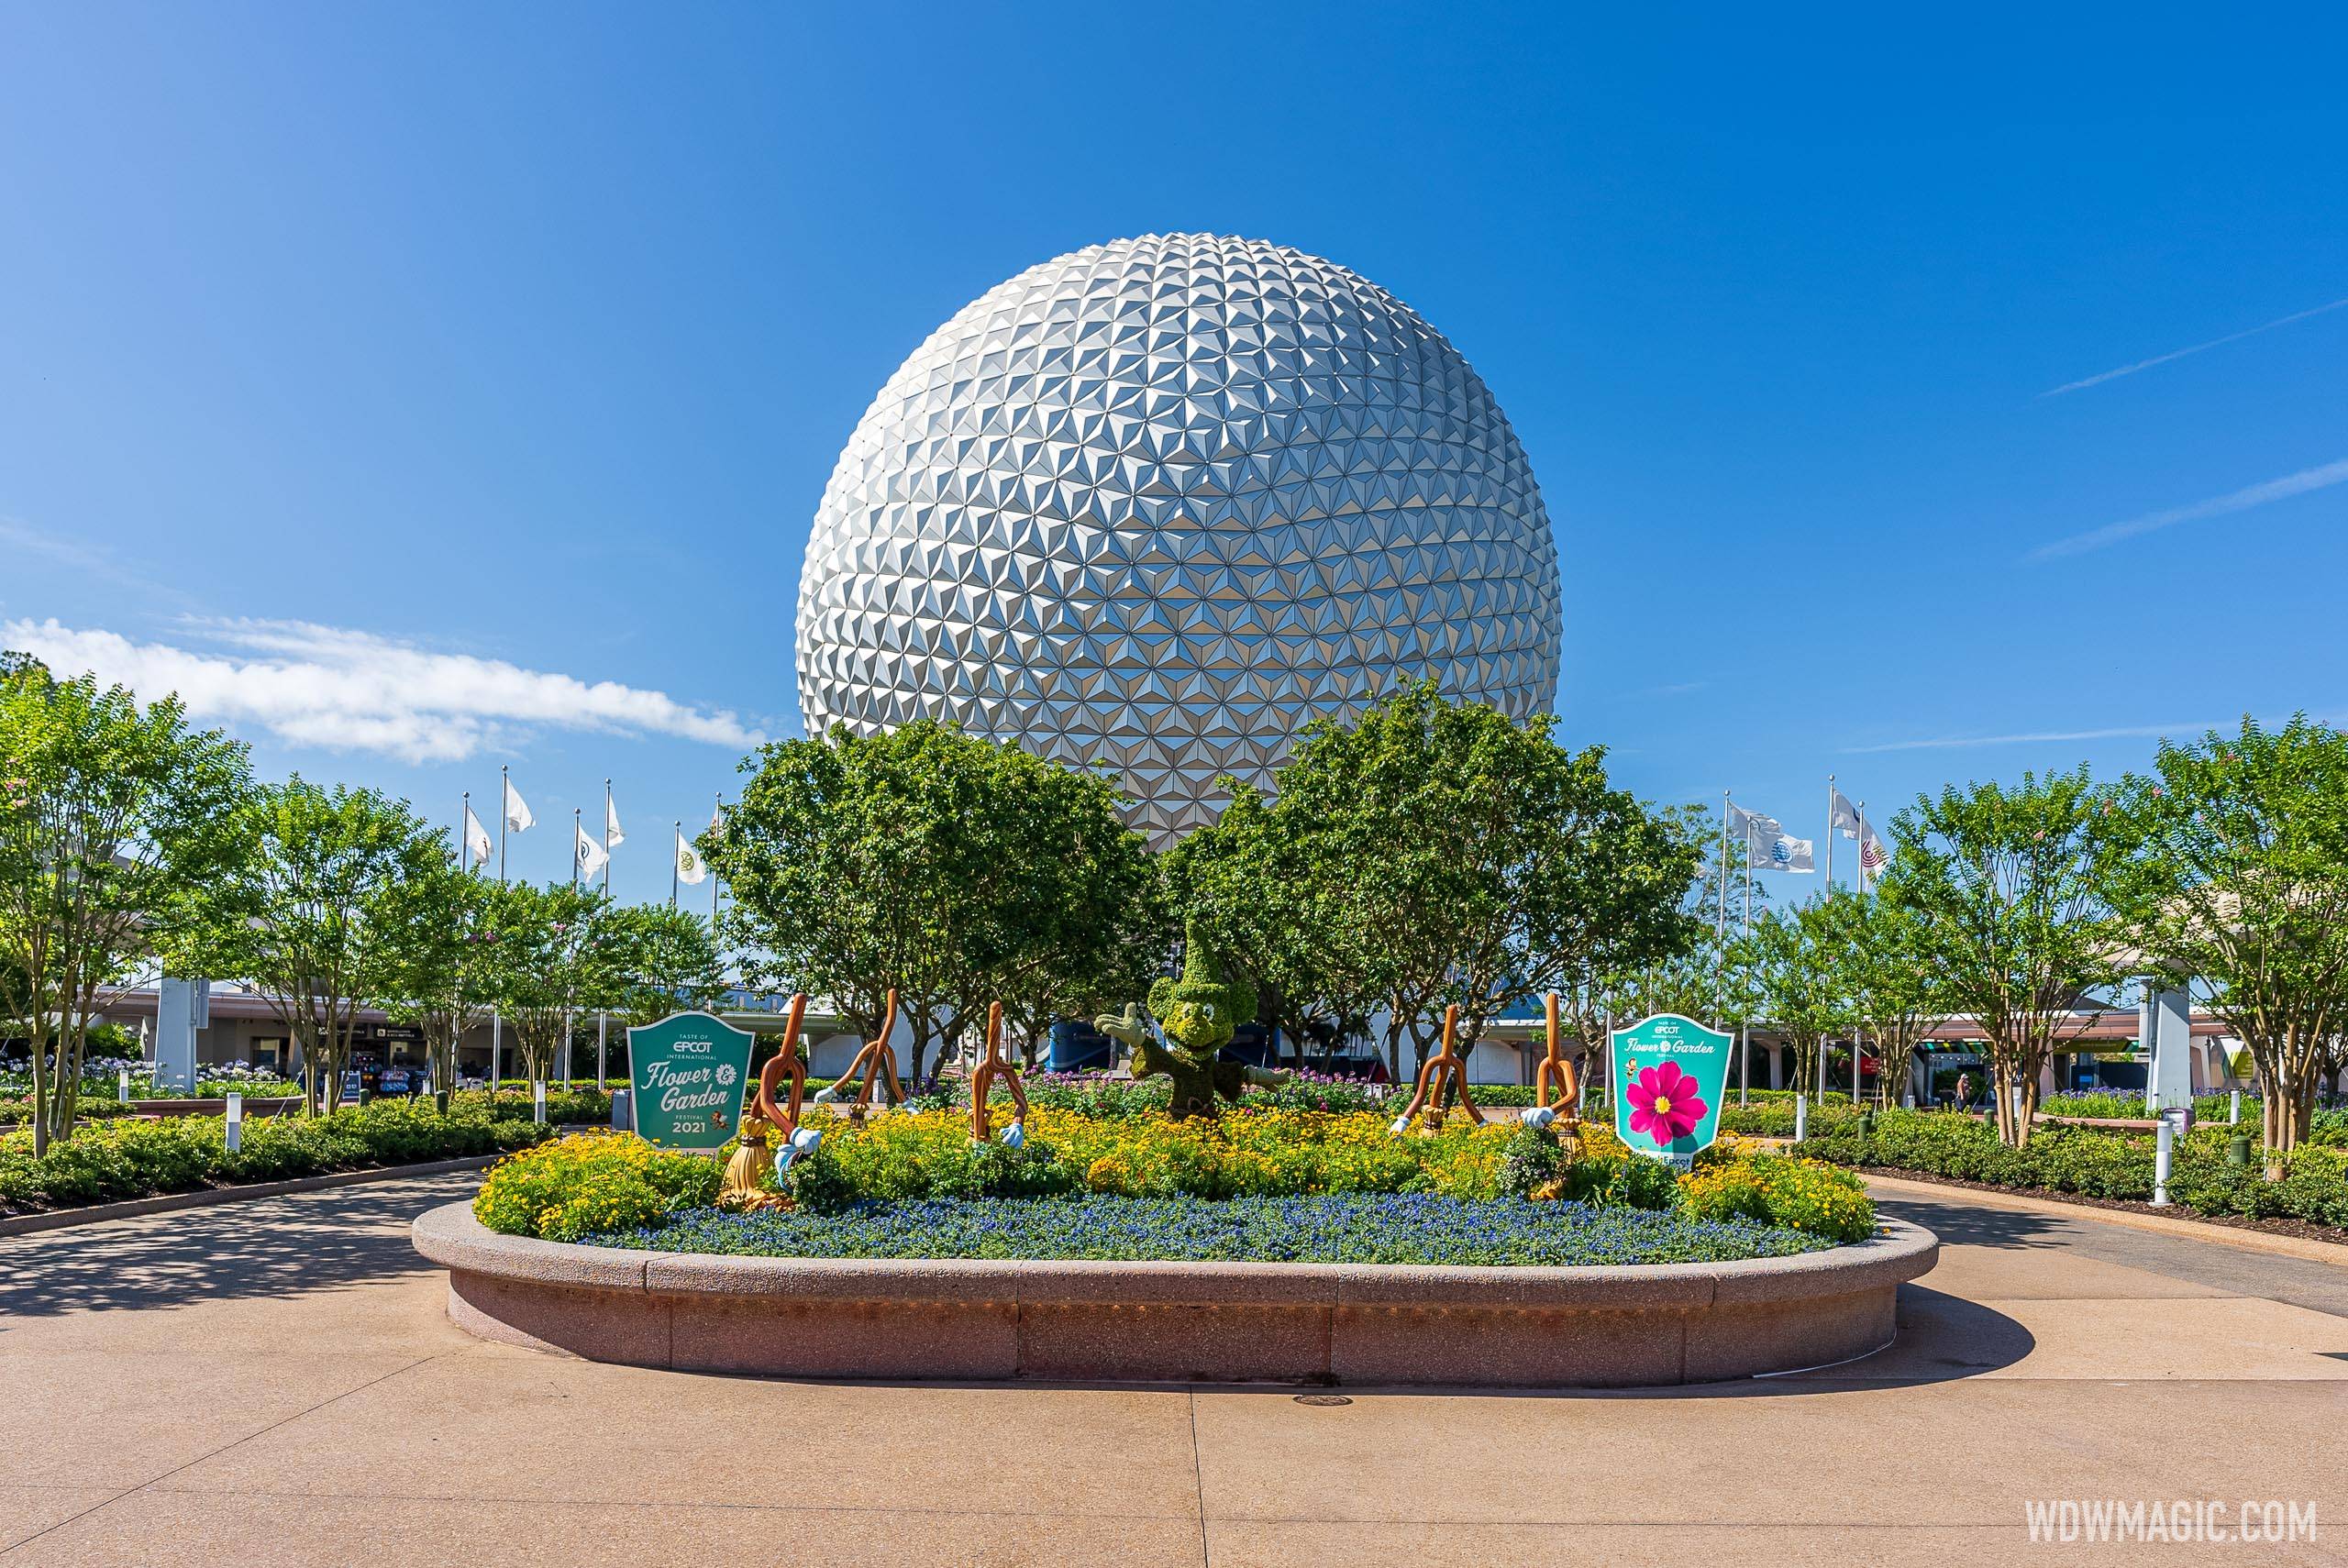 Epcot Showcases Global Musical Styles in World Music Concert Series June 13-Sept 1